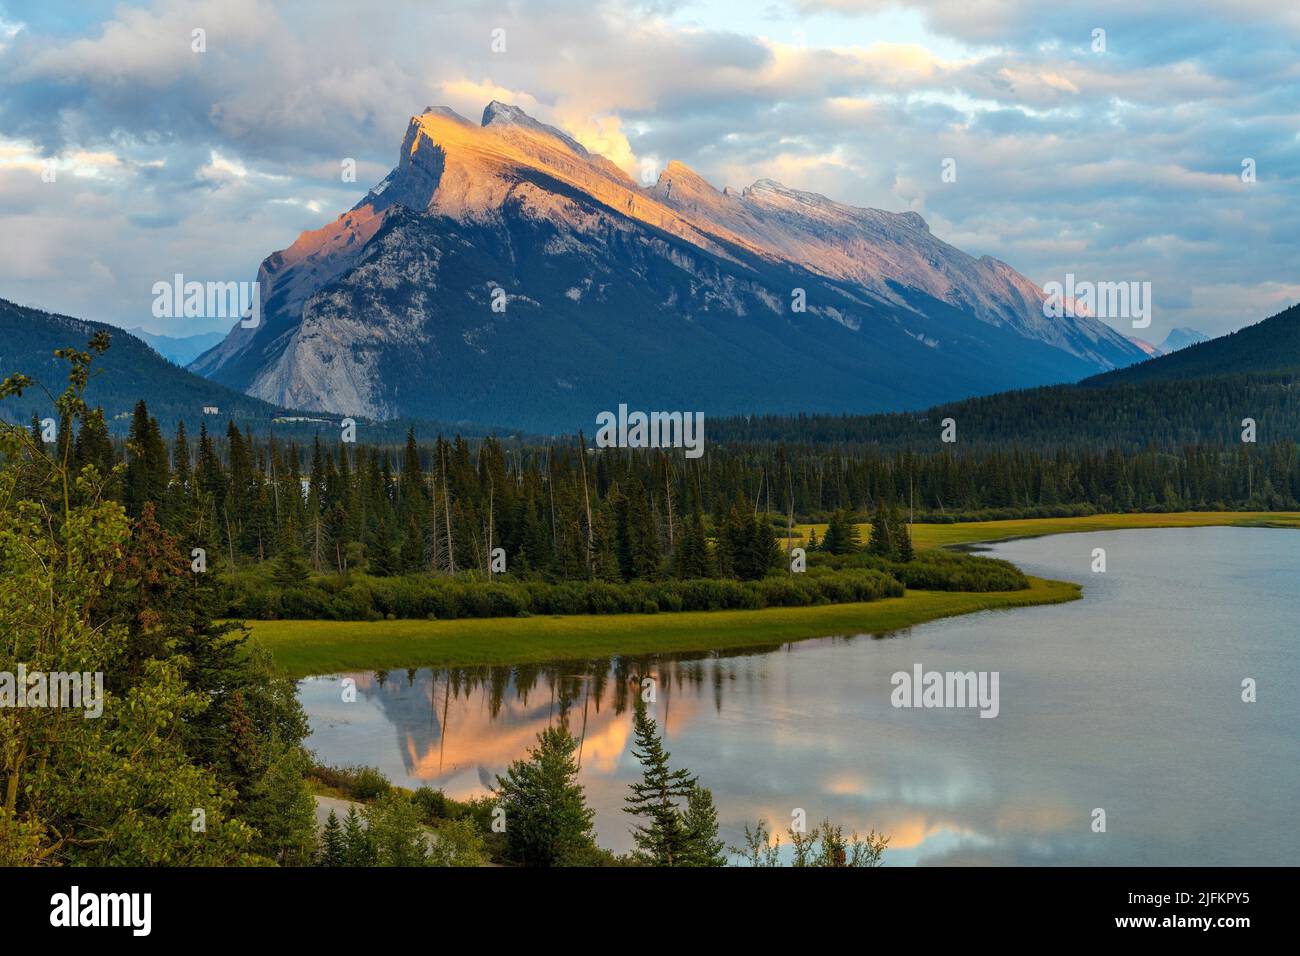 Bright colorful sunset over Mount Rundle (2949 M) with the Vermilion Lakes in the foreground in the Banff National Park, Alberta, Canada. Stock Photo